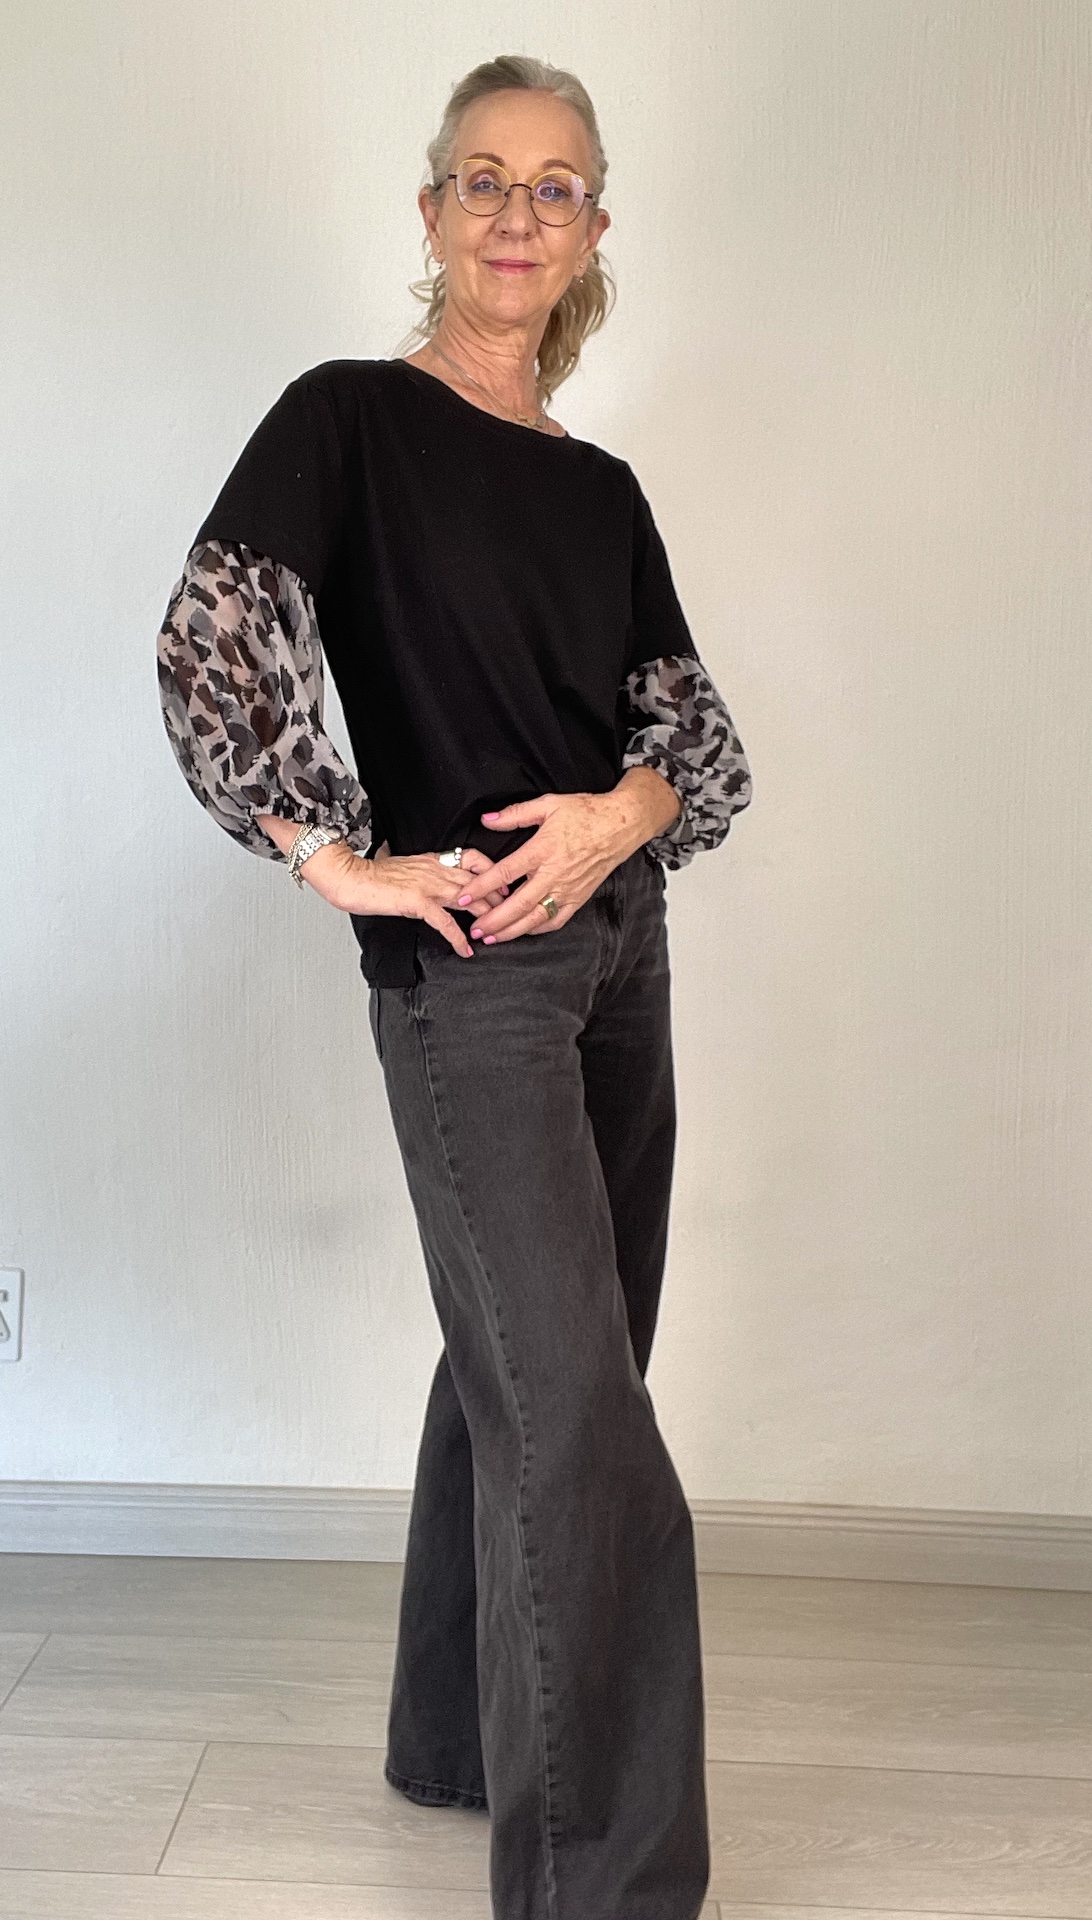 Black T – Style 5 with animal print sleeve